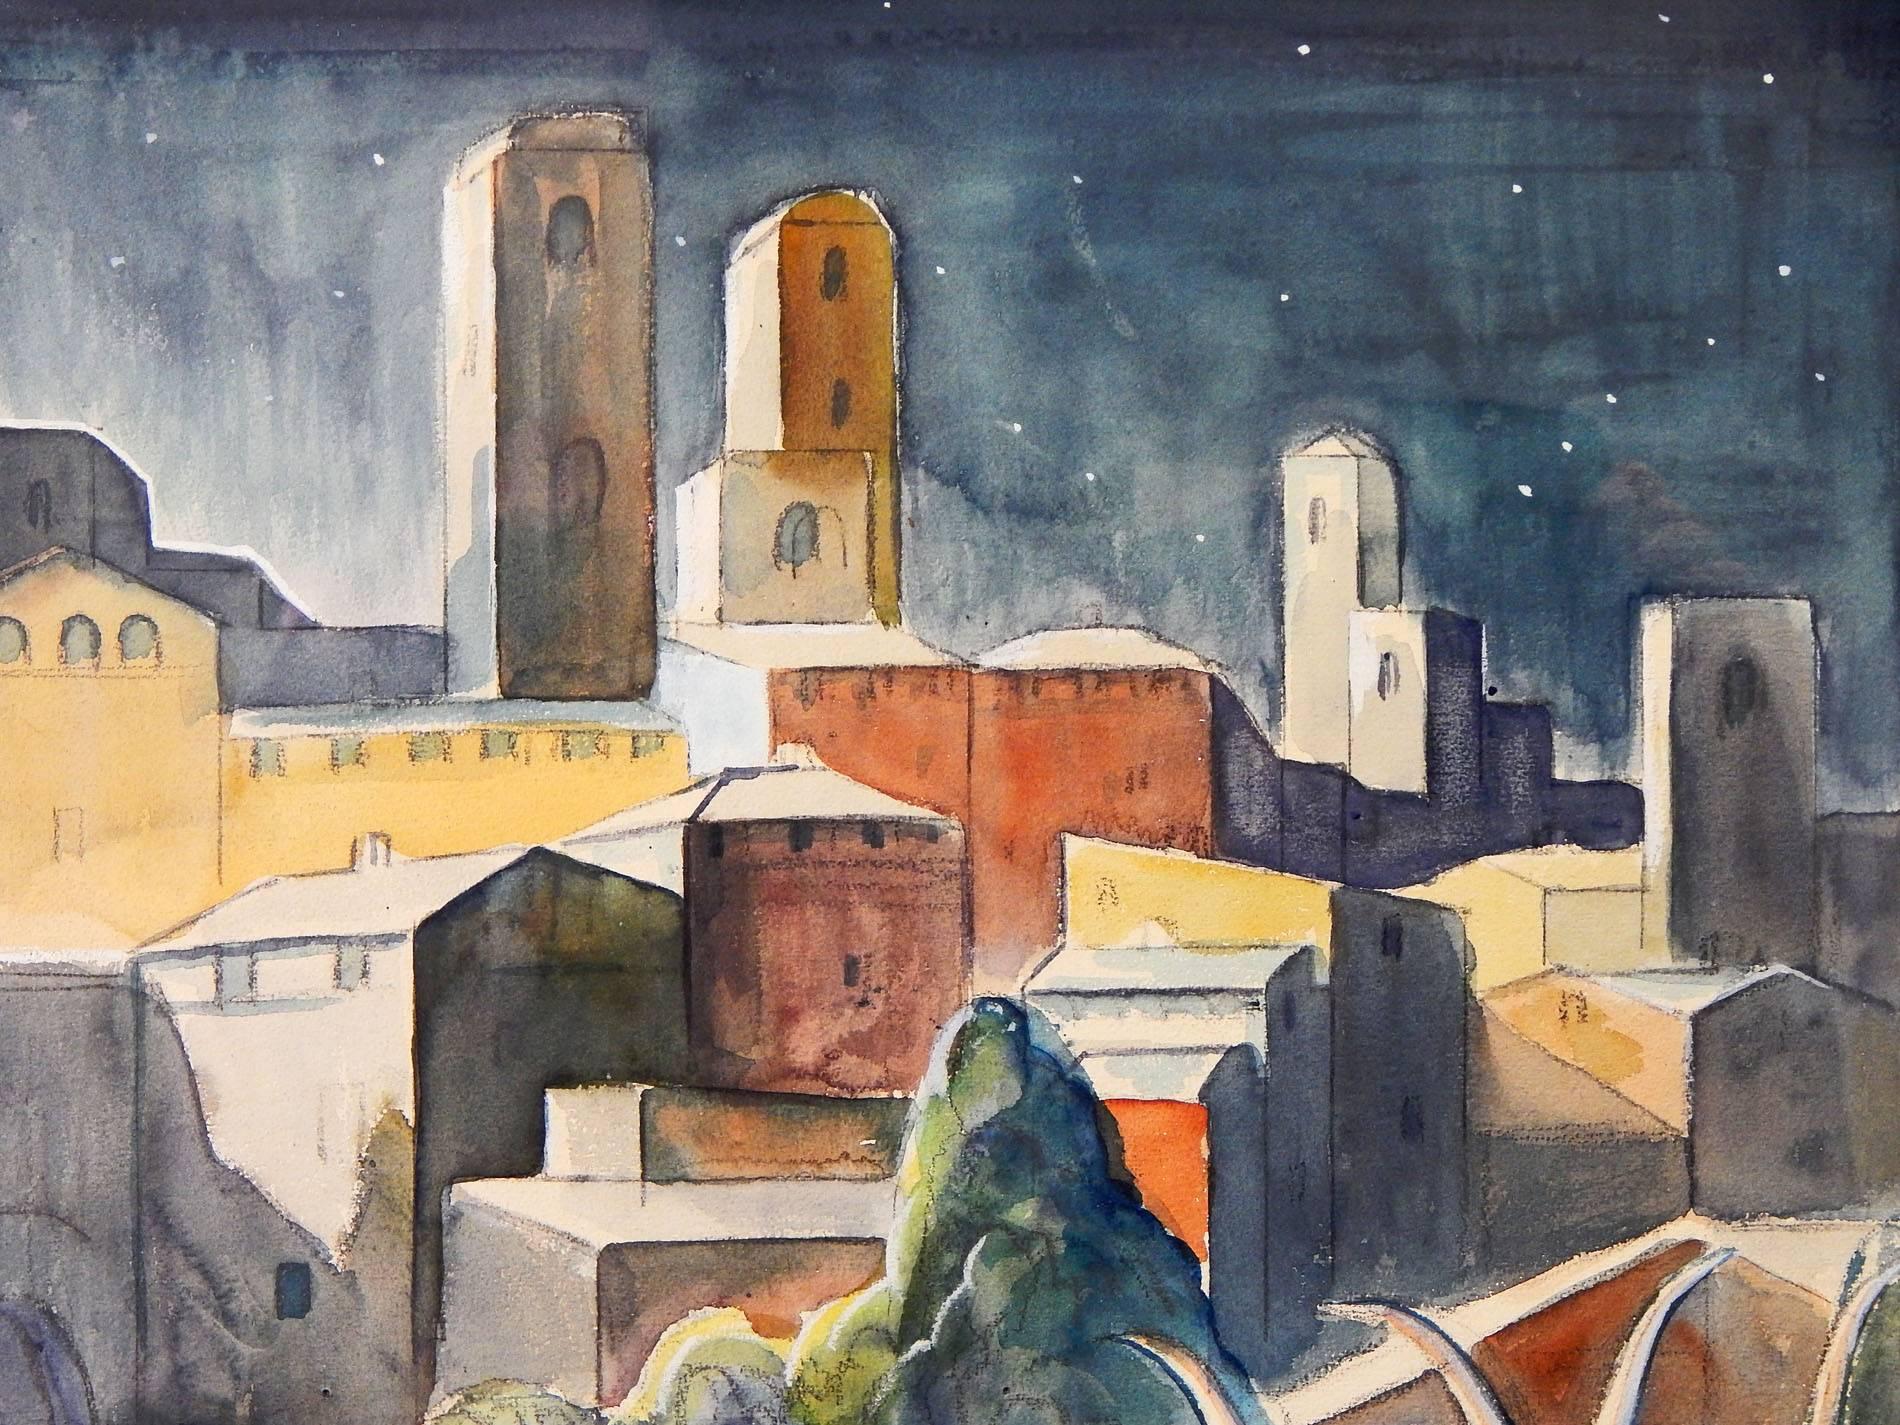 Brilliantly conceived and executed in a gorgeous palette of midnight blue, burnt sienna, ivory and charteuse, this depiction of San Gimagnano with a starry sky above was painted by John Lorin Black, an artist who worked in Cleveland and other parts